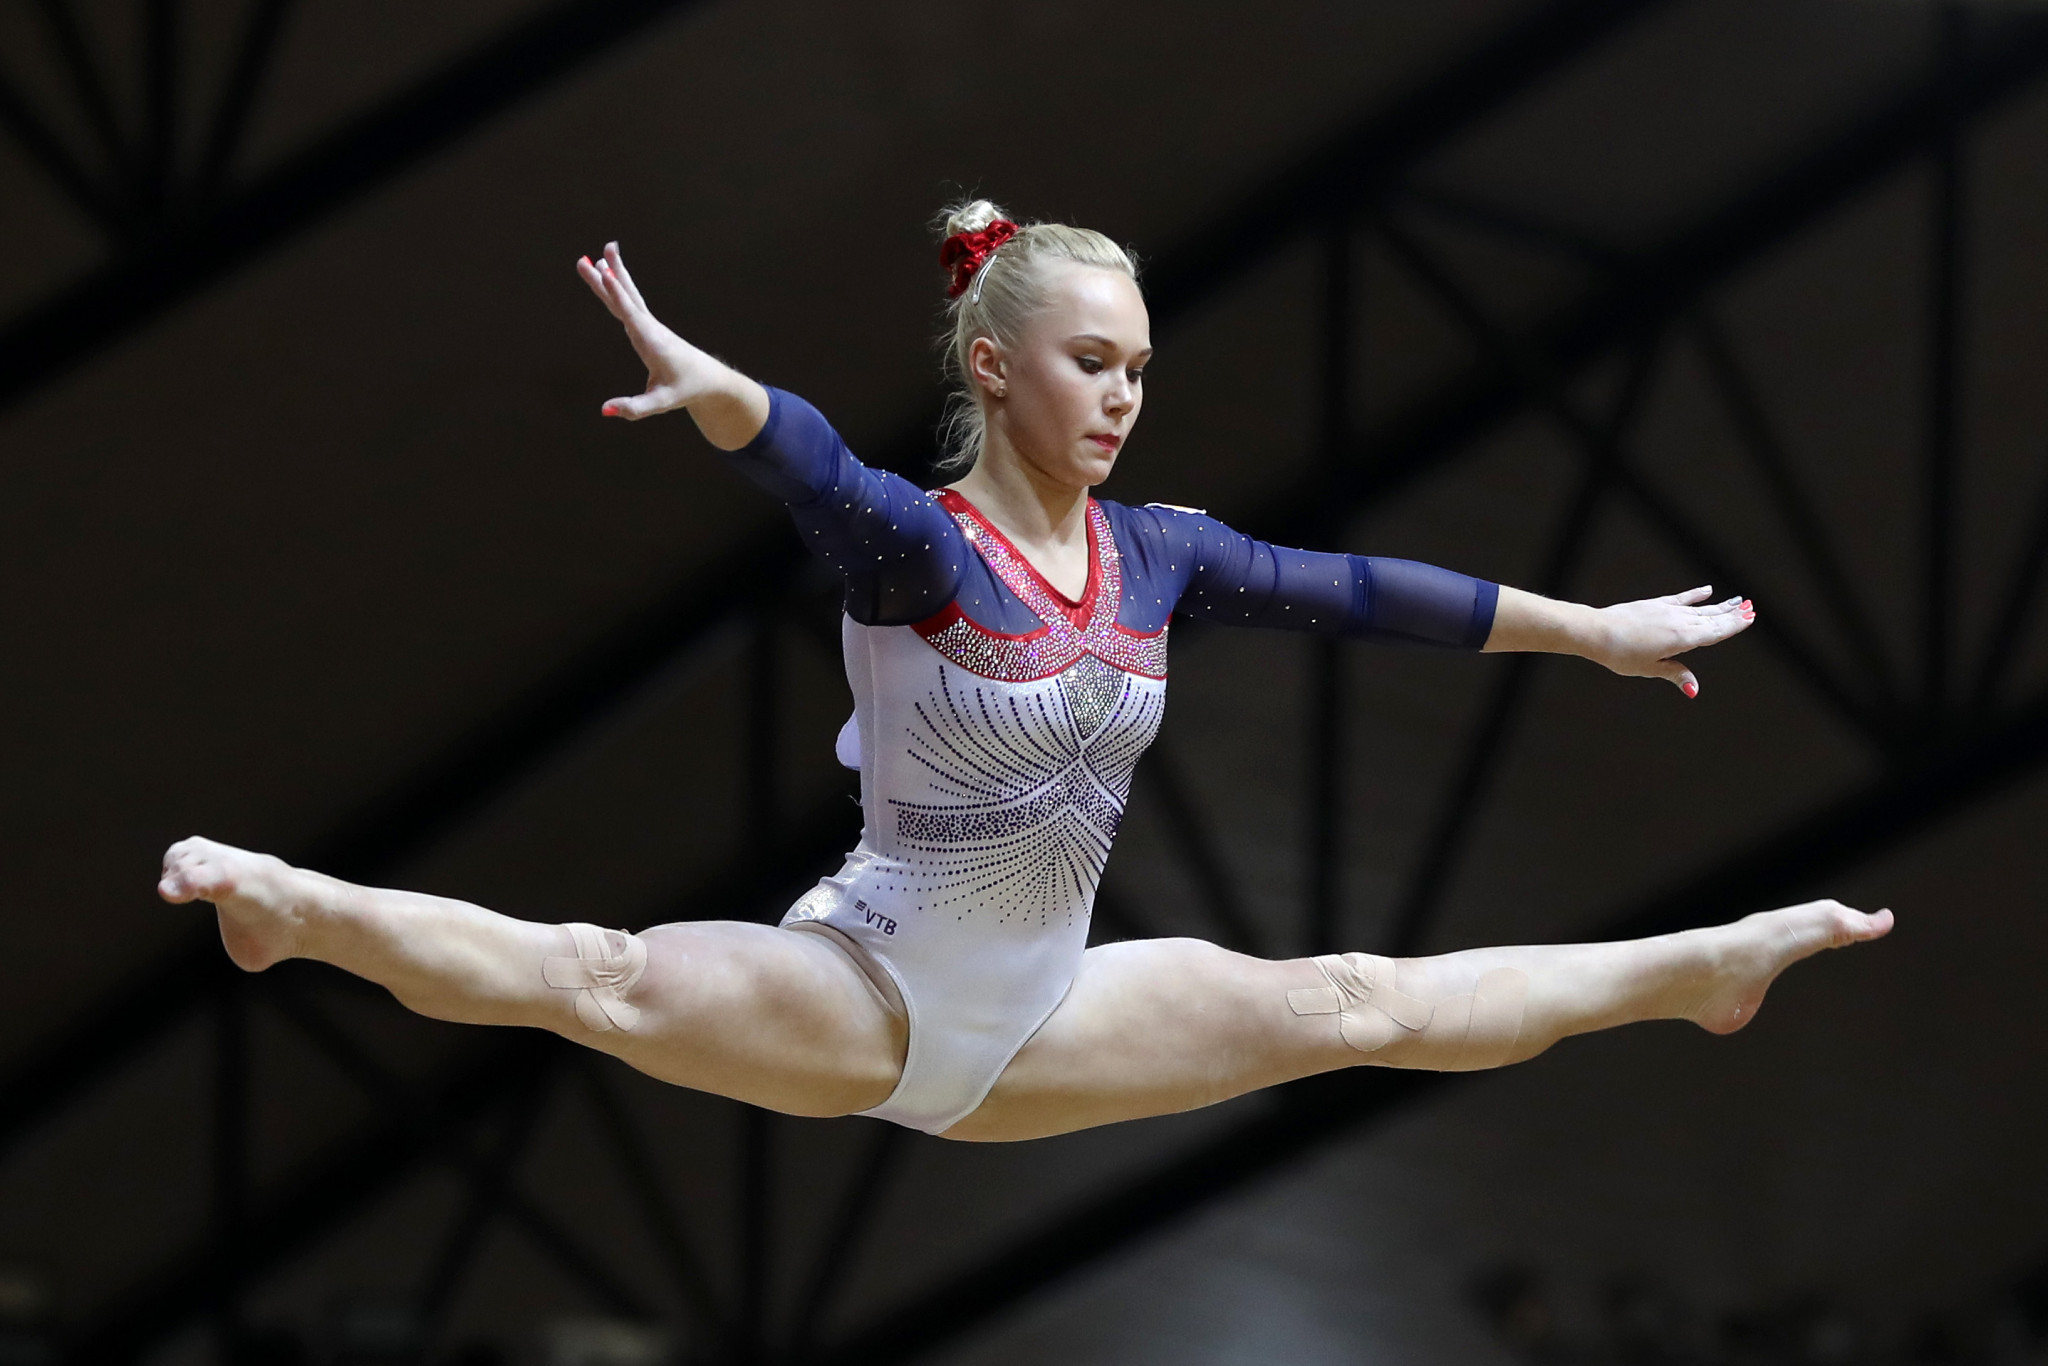 Russia’s Angelina Melnikova took first place in the women's all-around qualification standings on day two of the European Artistic Gymnastics Individual Championships in Polish city Szczecin ©Getty Images